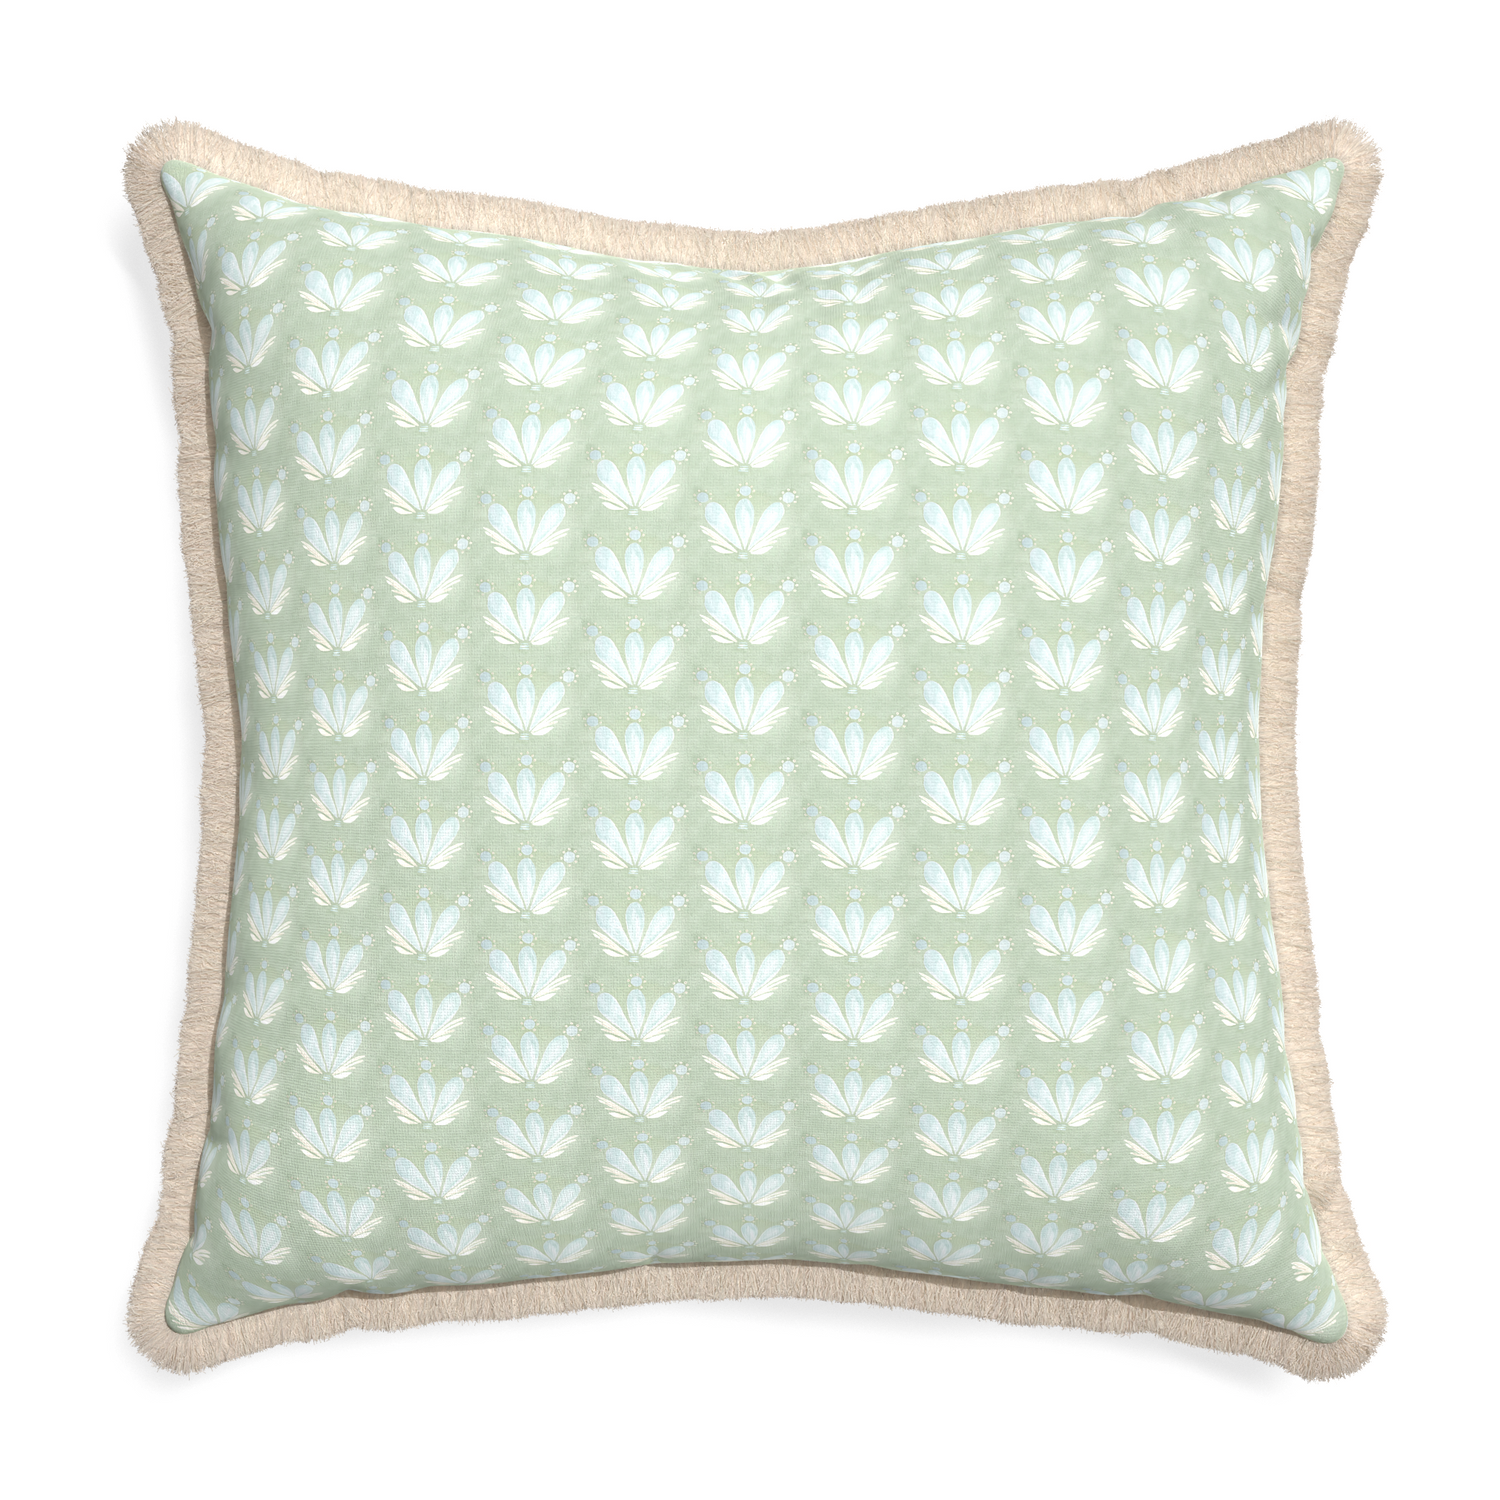 Euro-sham serena sea salt custom blue & green floral drop repeatpillow with cream fringe on white background